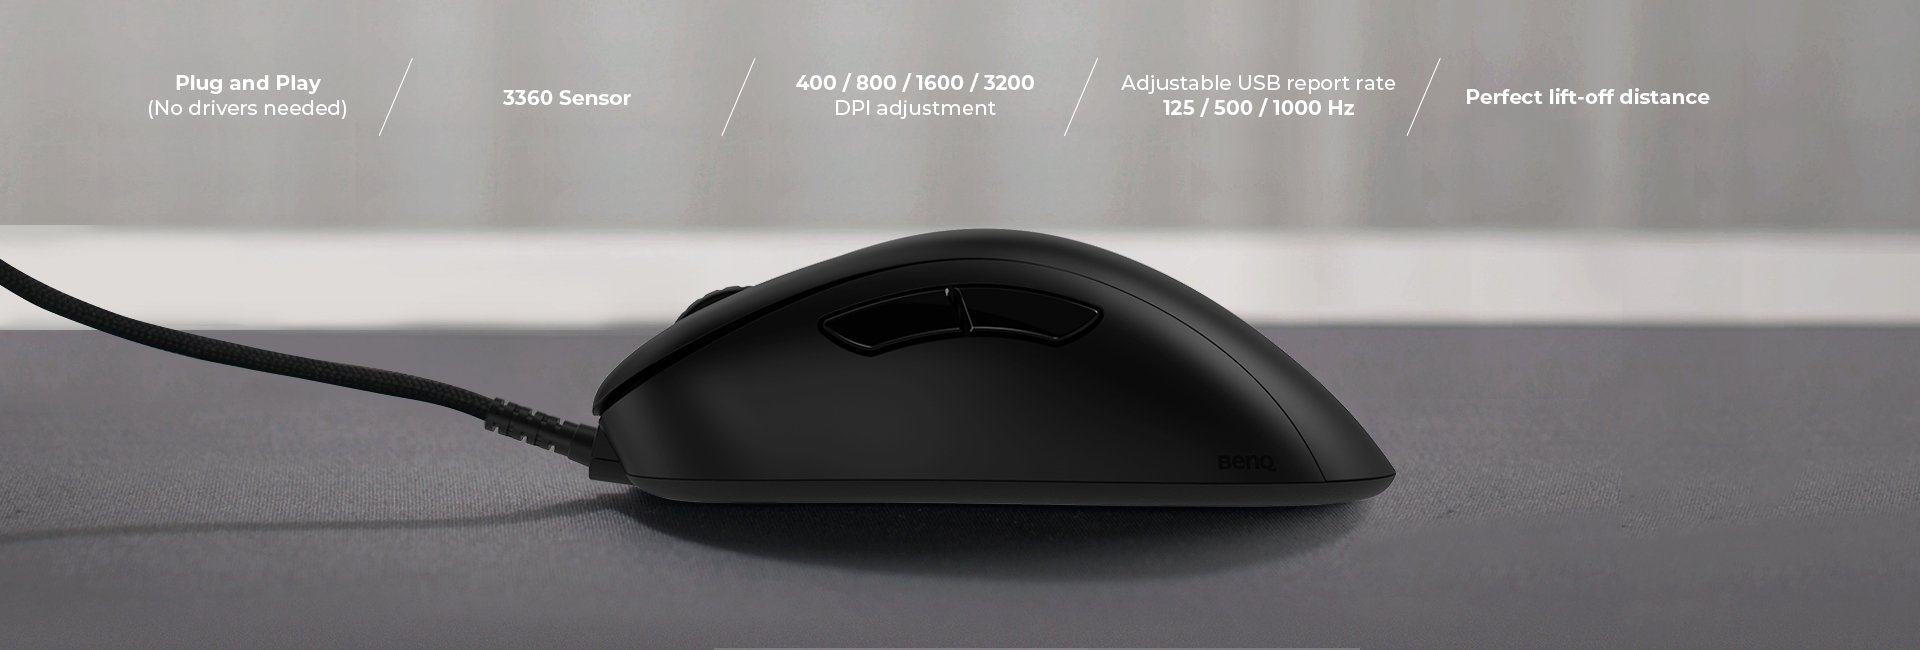 zowie-esports-gaming-mouse-ec2-c-plug-and-play-3360-sensor-dpi-adjustment-adjustable-usb-report-rate-perfect-lift-off-distance